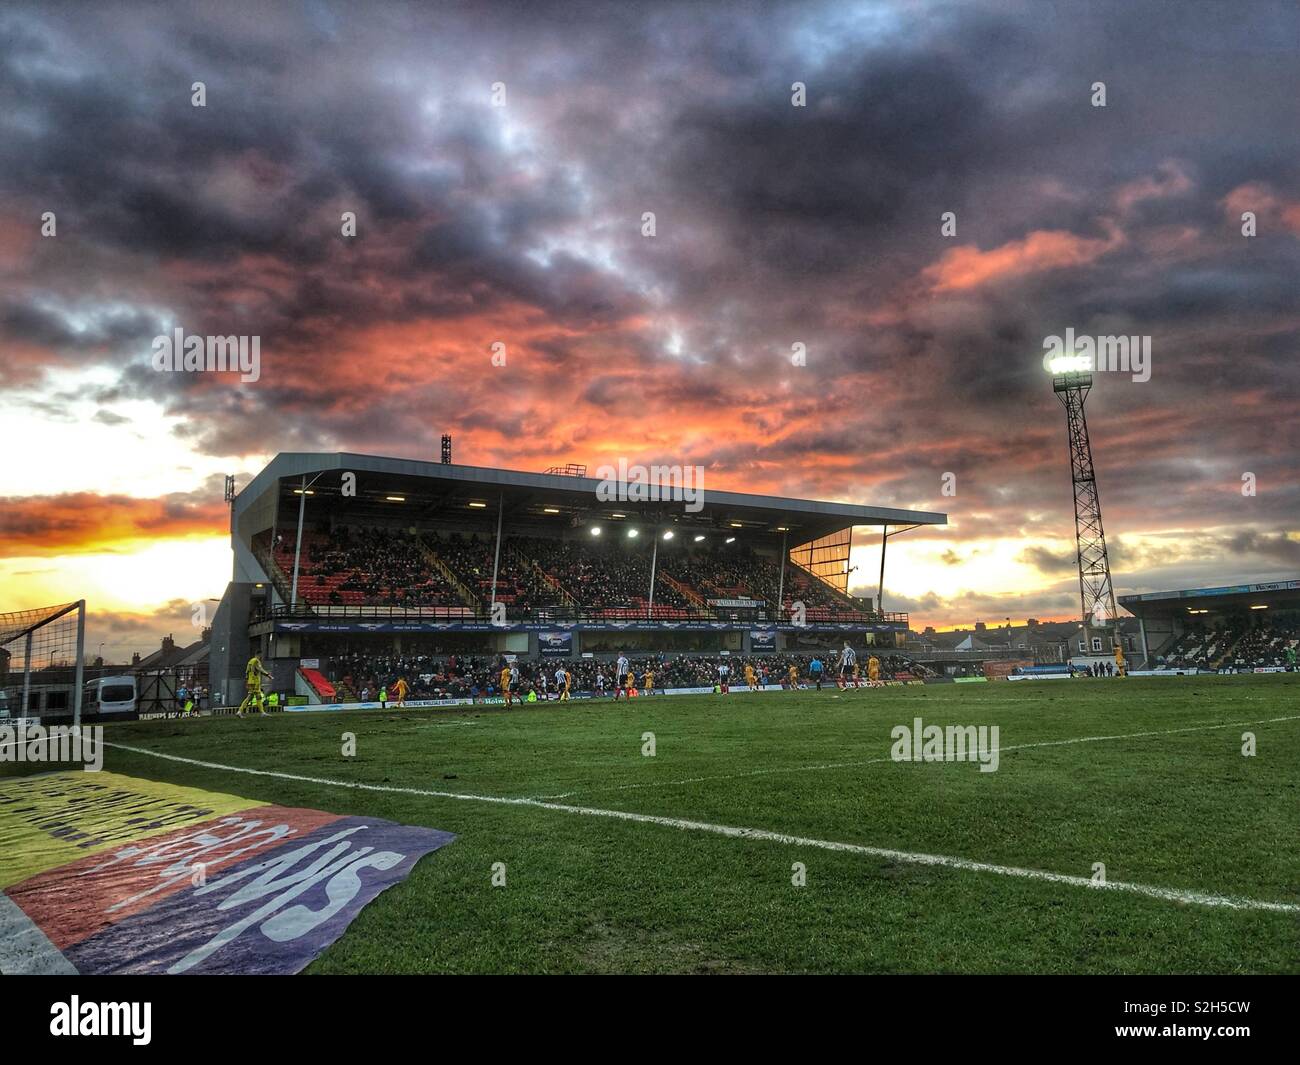 Dramatic skies over Blundell Park in Cleethorpes as Grimsby Town FC takes on Newport County in a EFL league two match Stock Photo